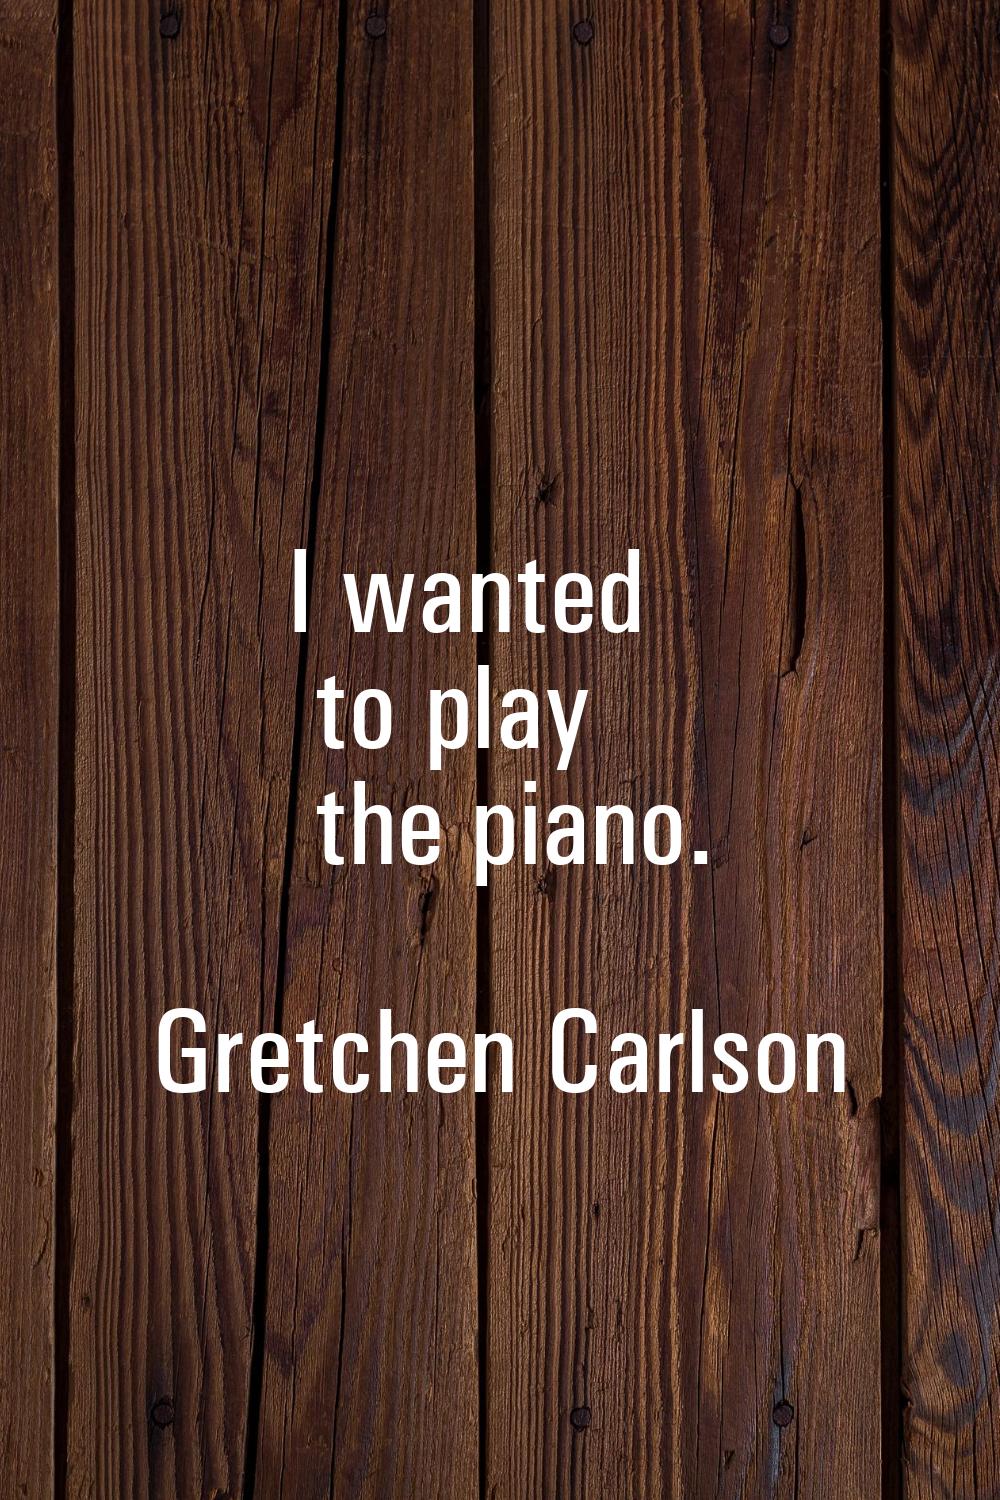 I wanted to play the piano.